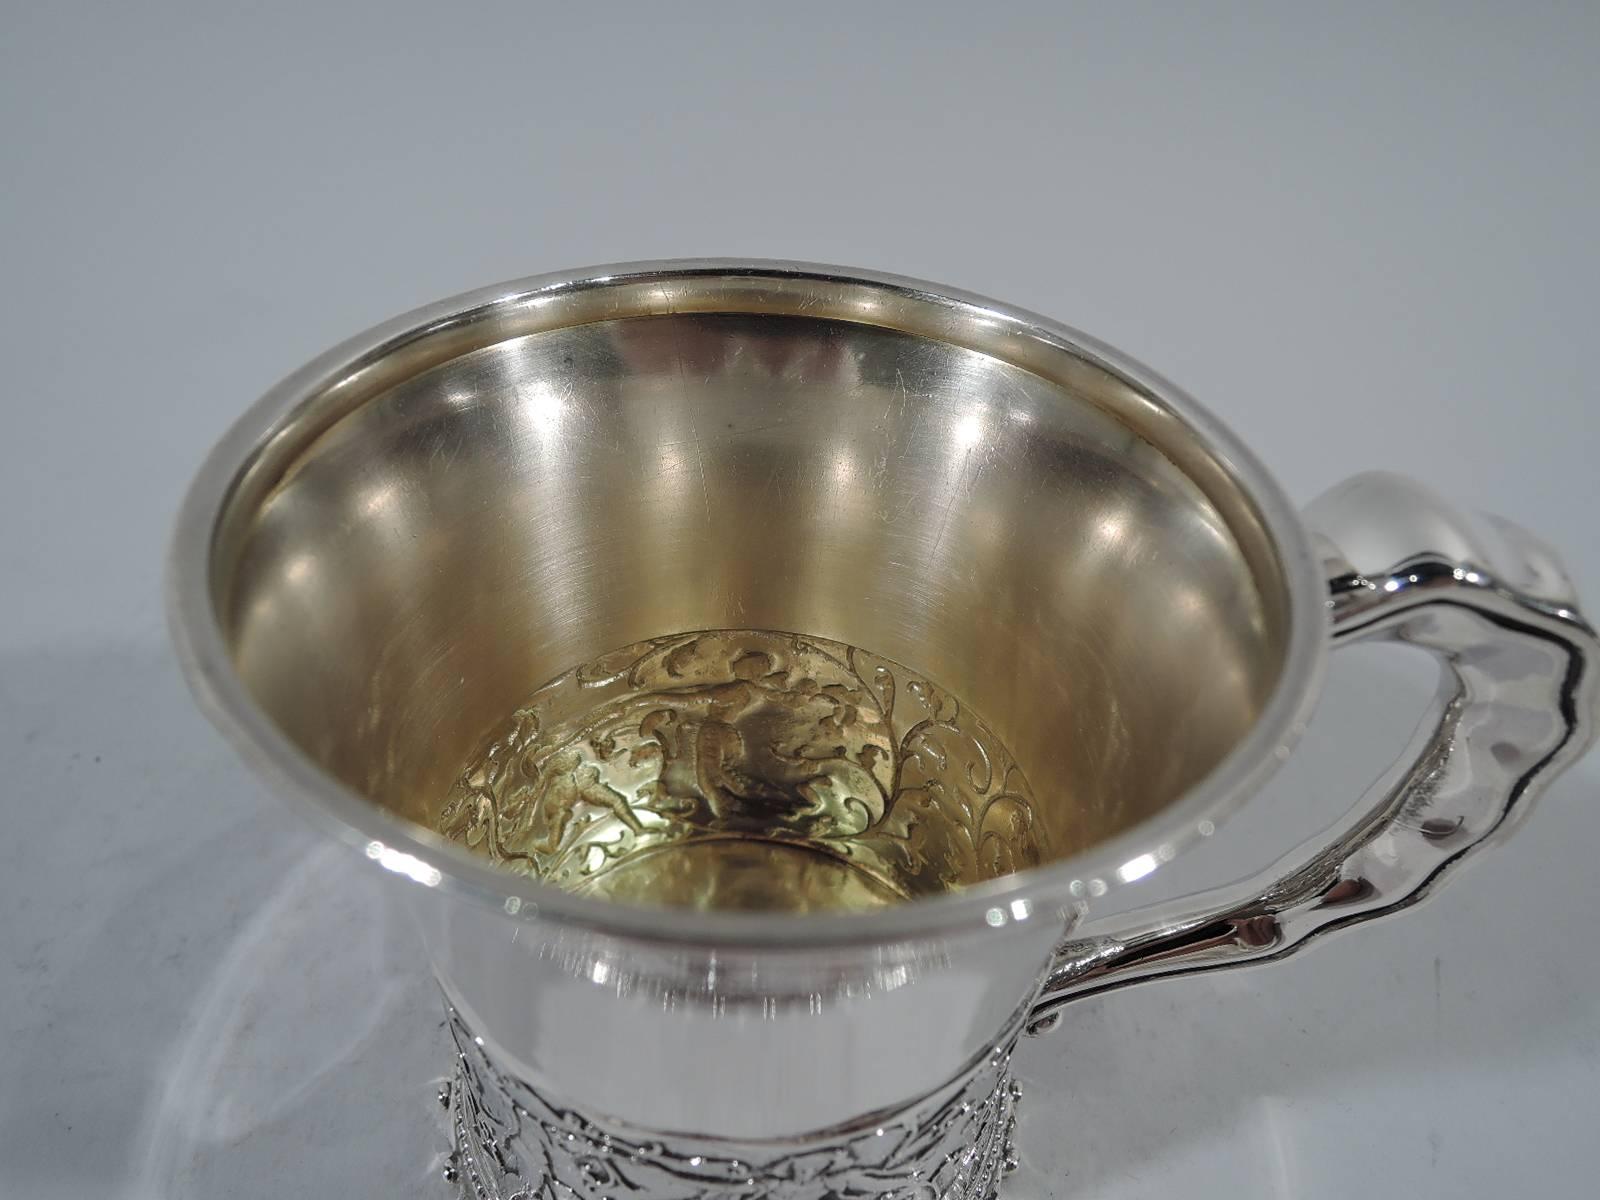 Sterling silver baby cup. Made by Gorham in Providence, ca 1890. Flared rim, notched stroll handle, and studded base. At bottom is chased (and chaste) troubadour scene: Men in tunics and hose and women in gowns and wimples dance amidst leafing